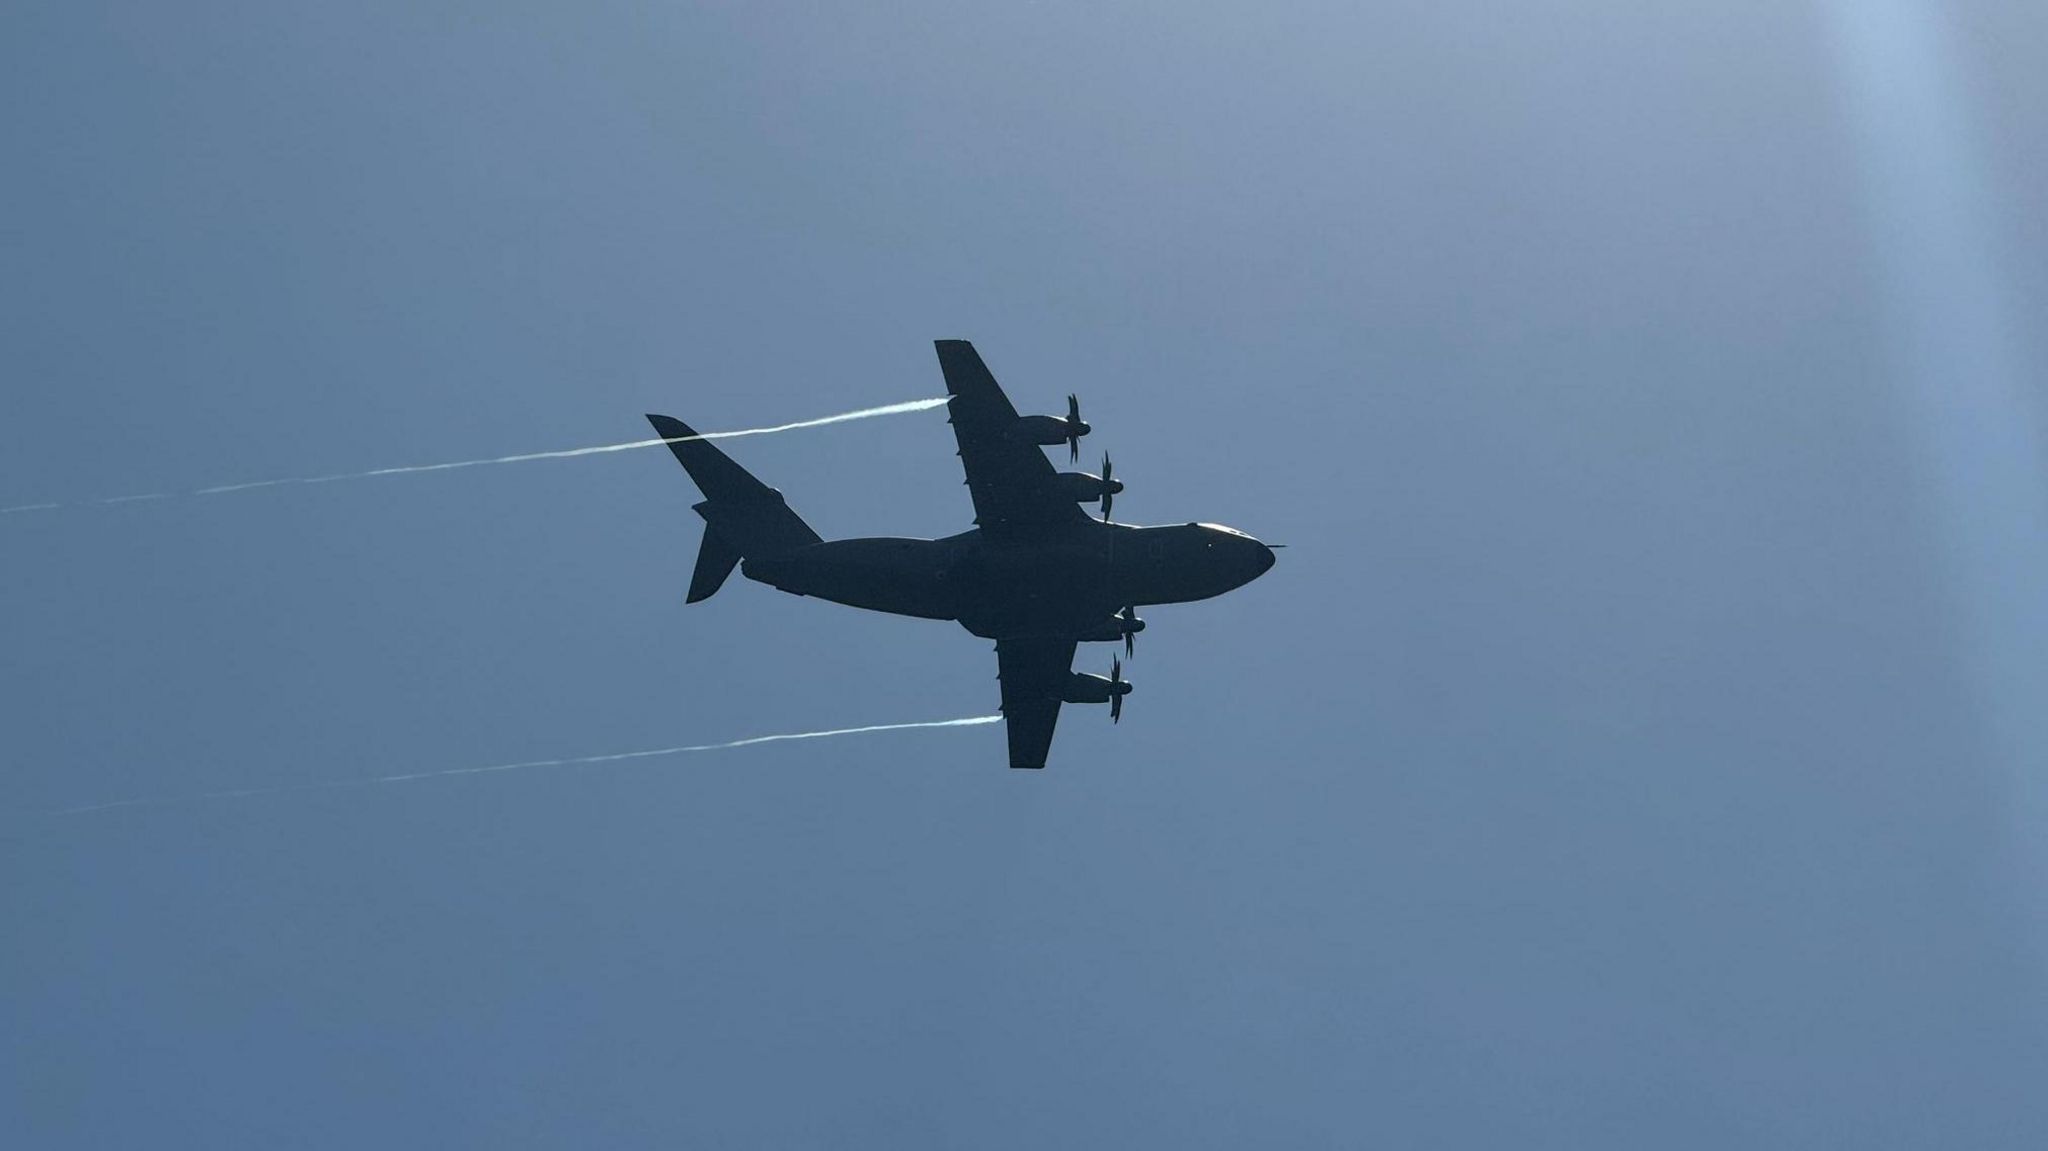 A C400 military aircraft in flight